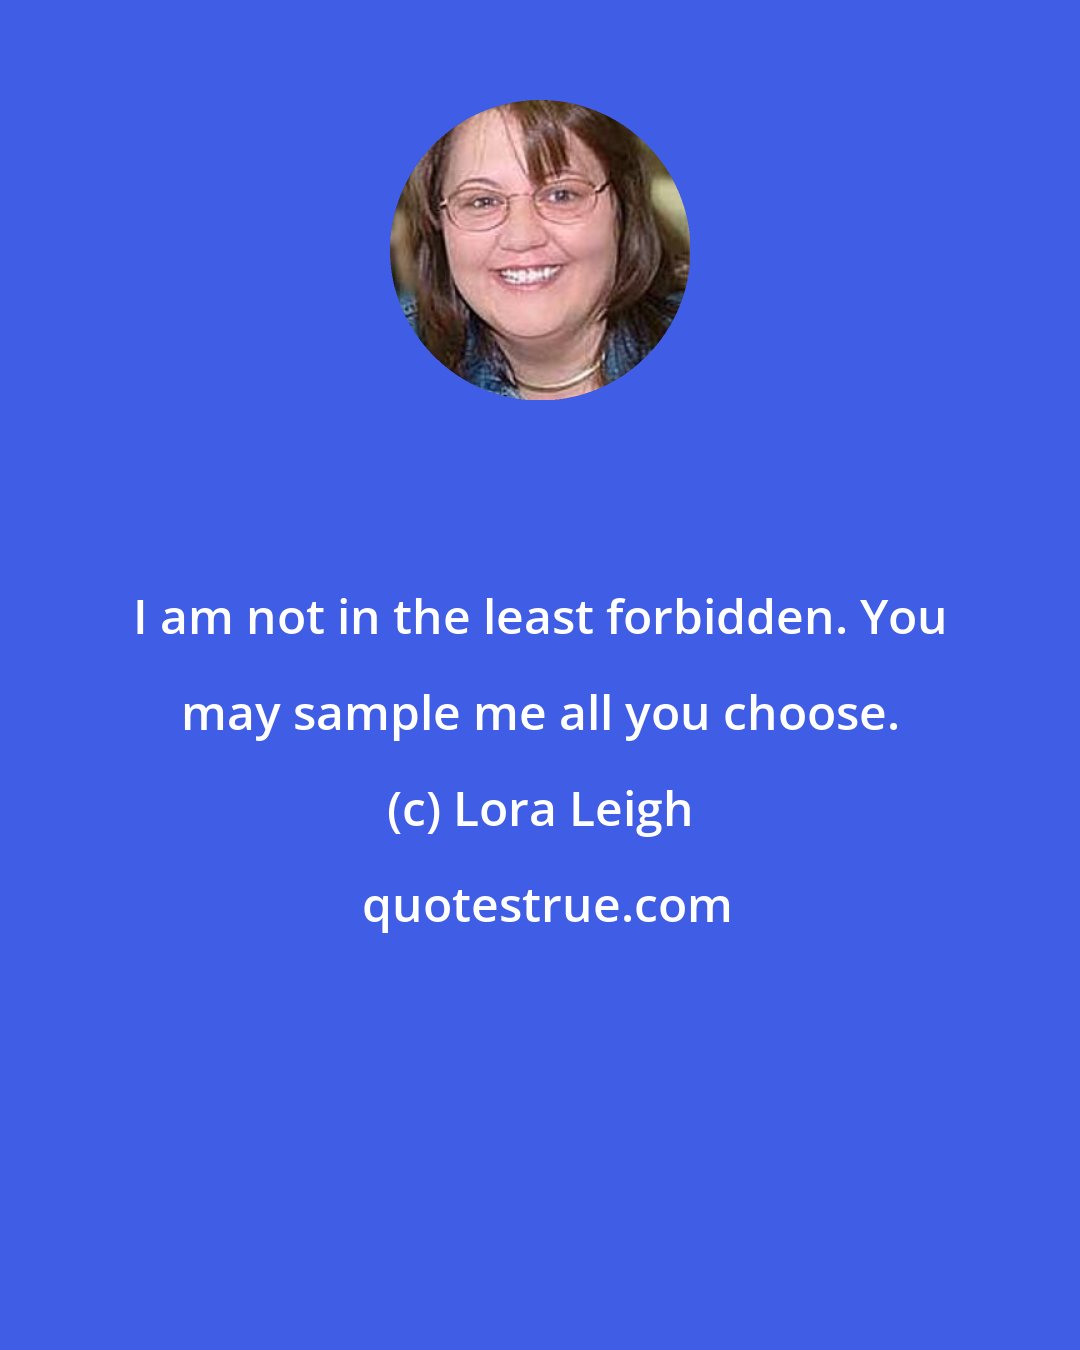 Lora Leigh: I am not in the least forbidden. You may sample me all you choose.